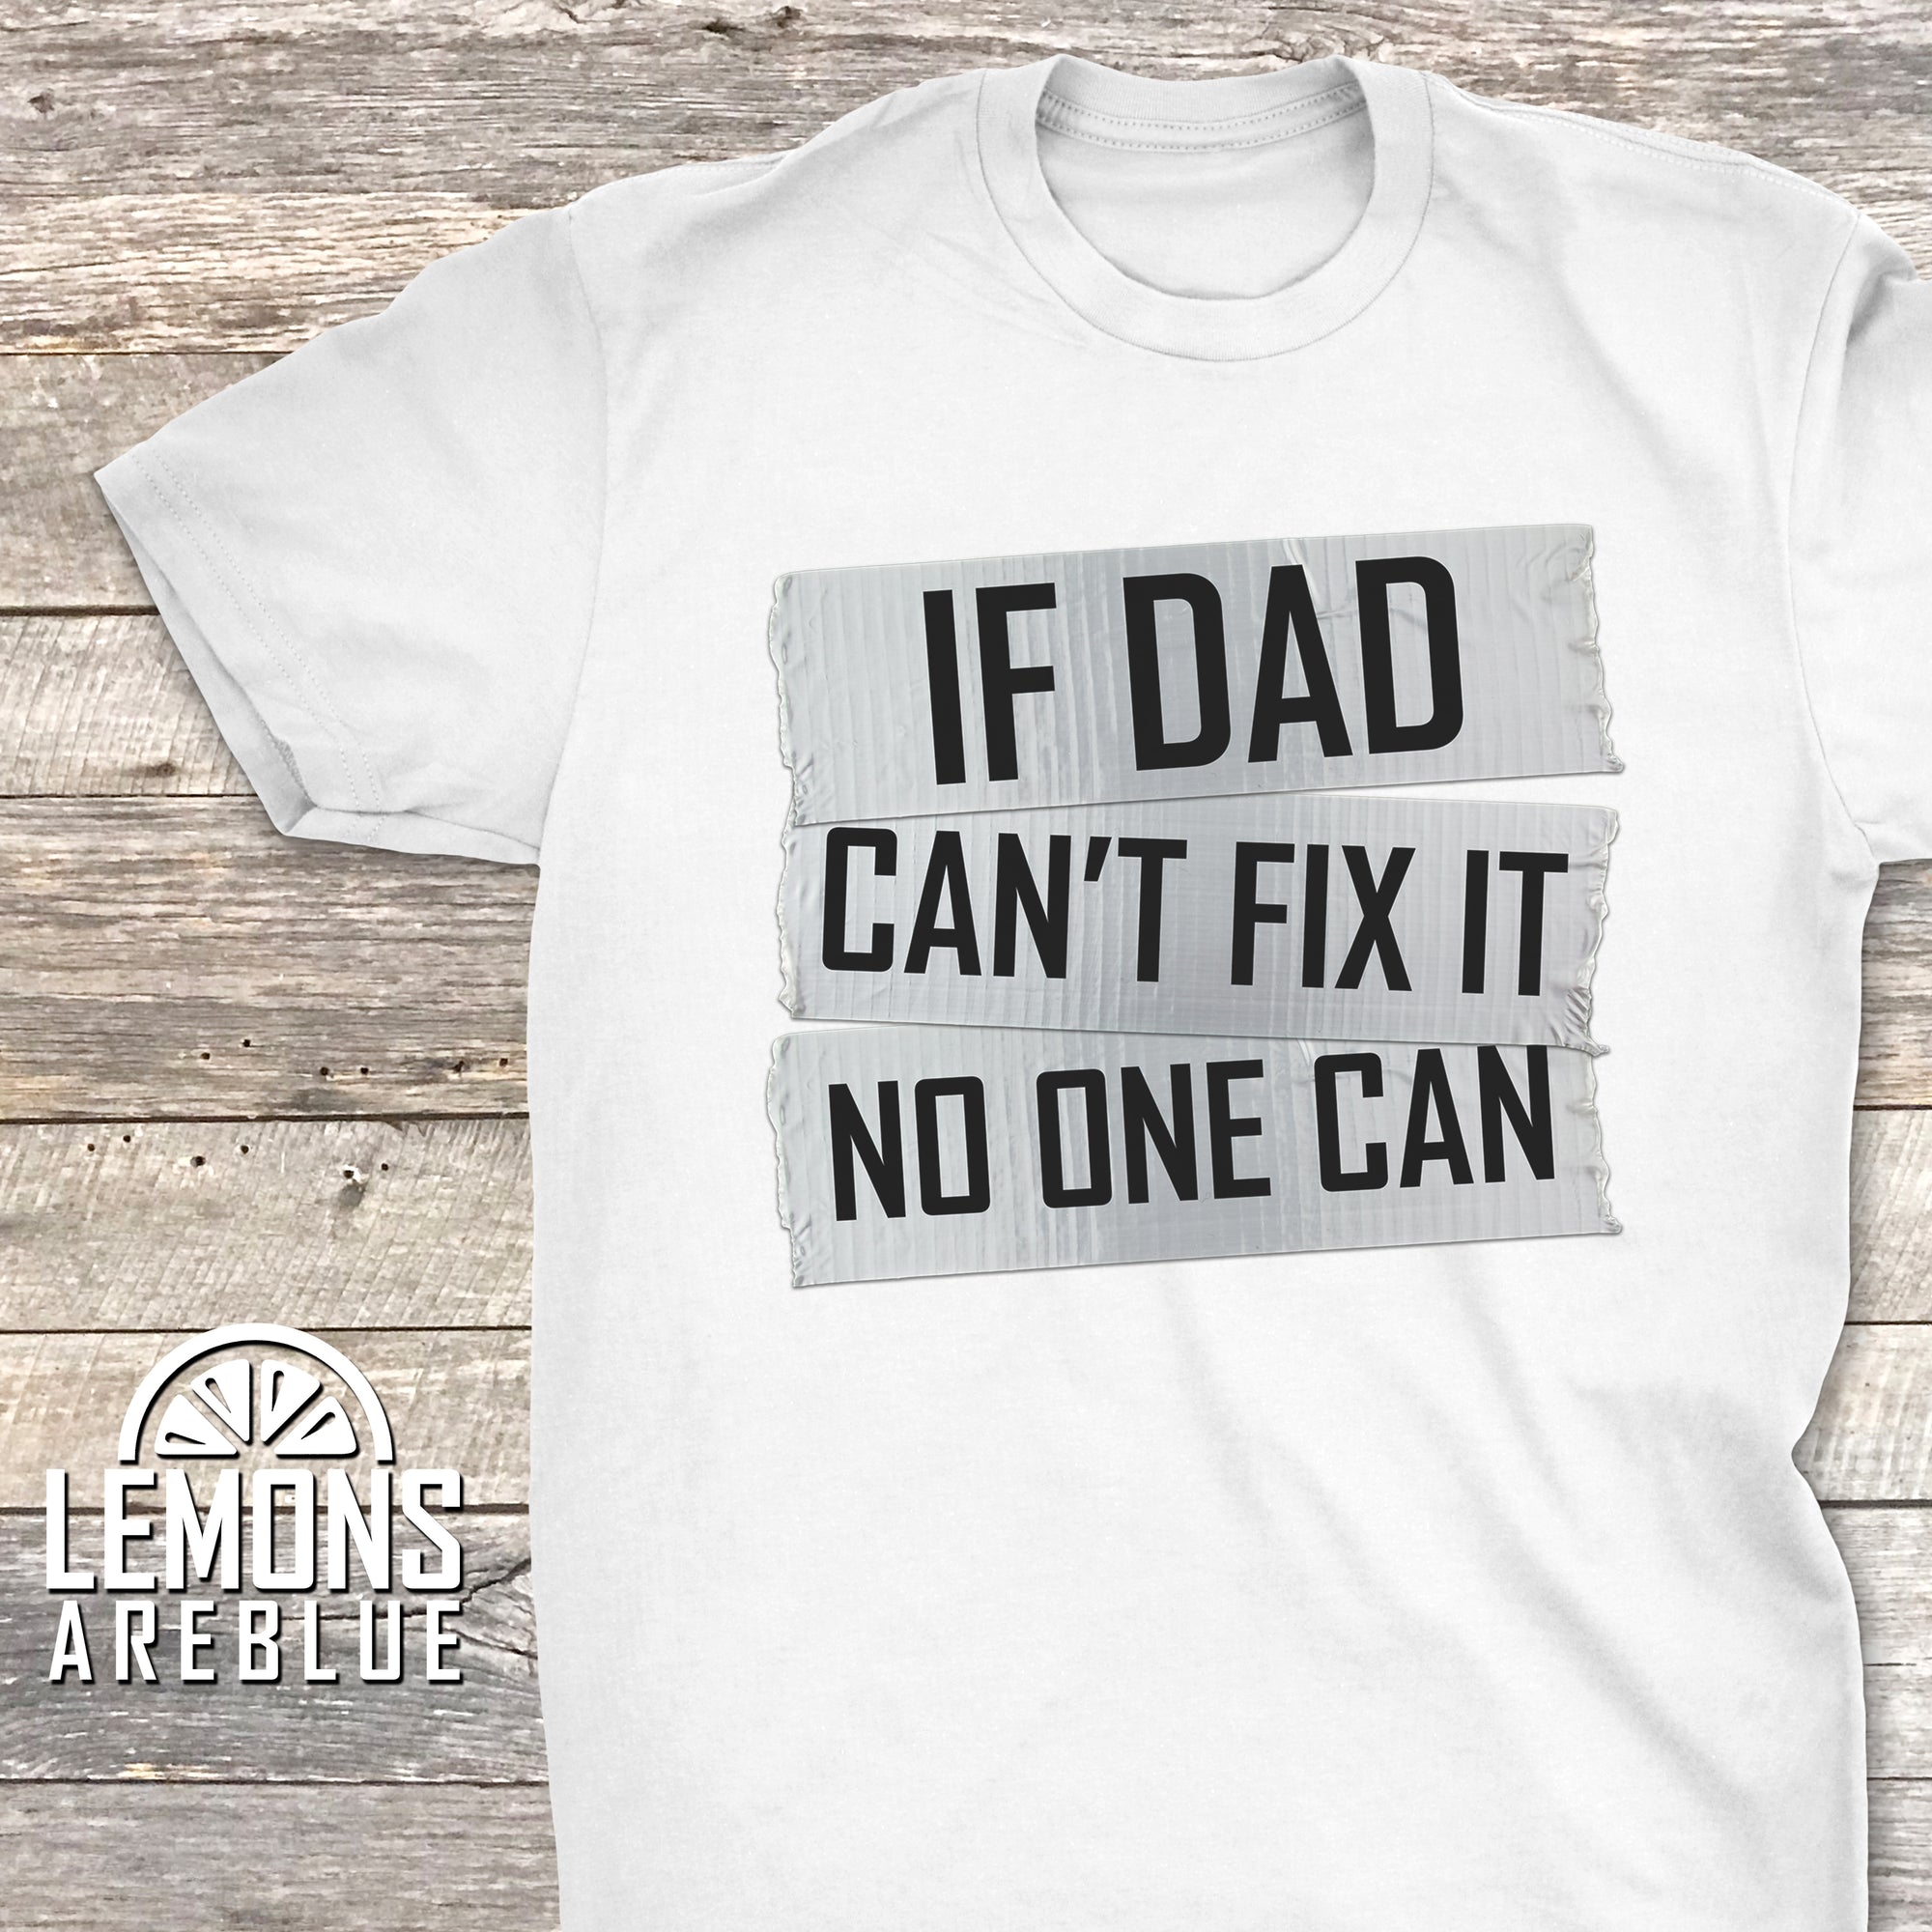 If Dad Can't Fix It No One Can Tape Premium Tees